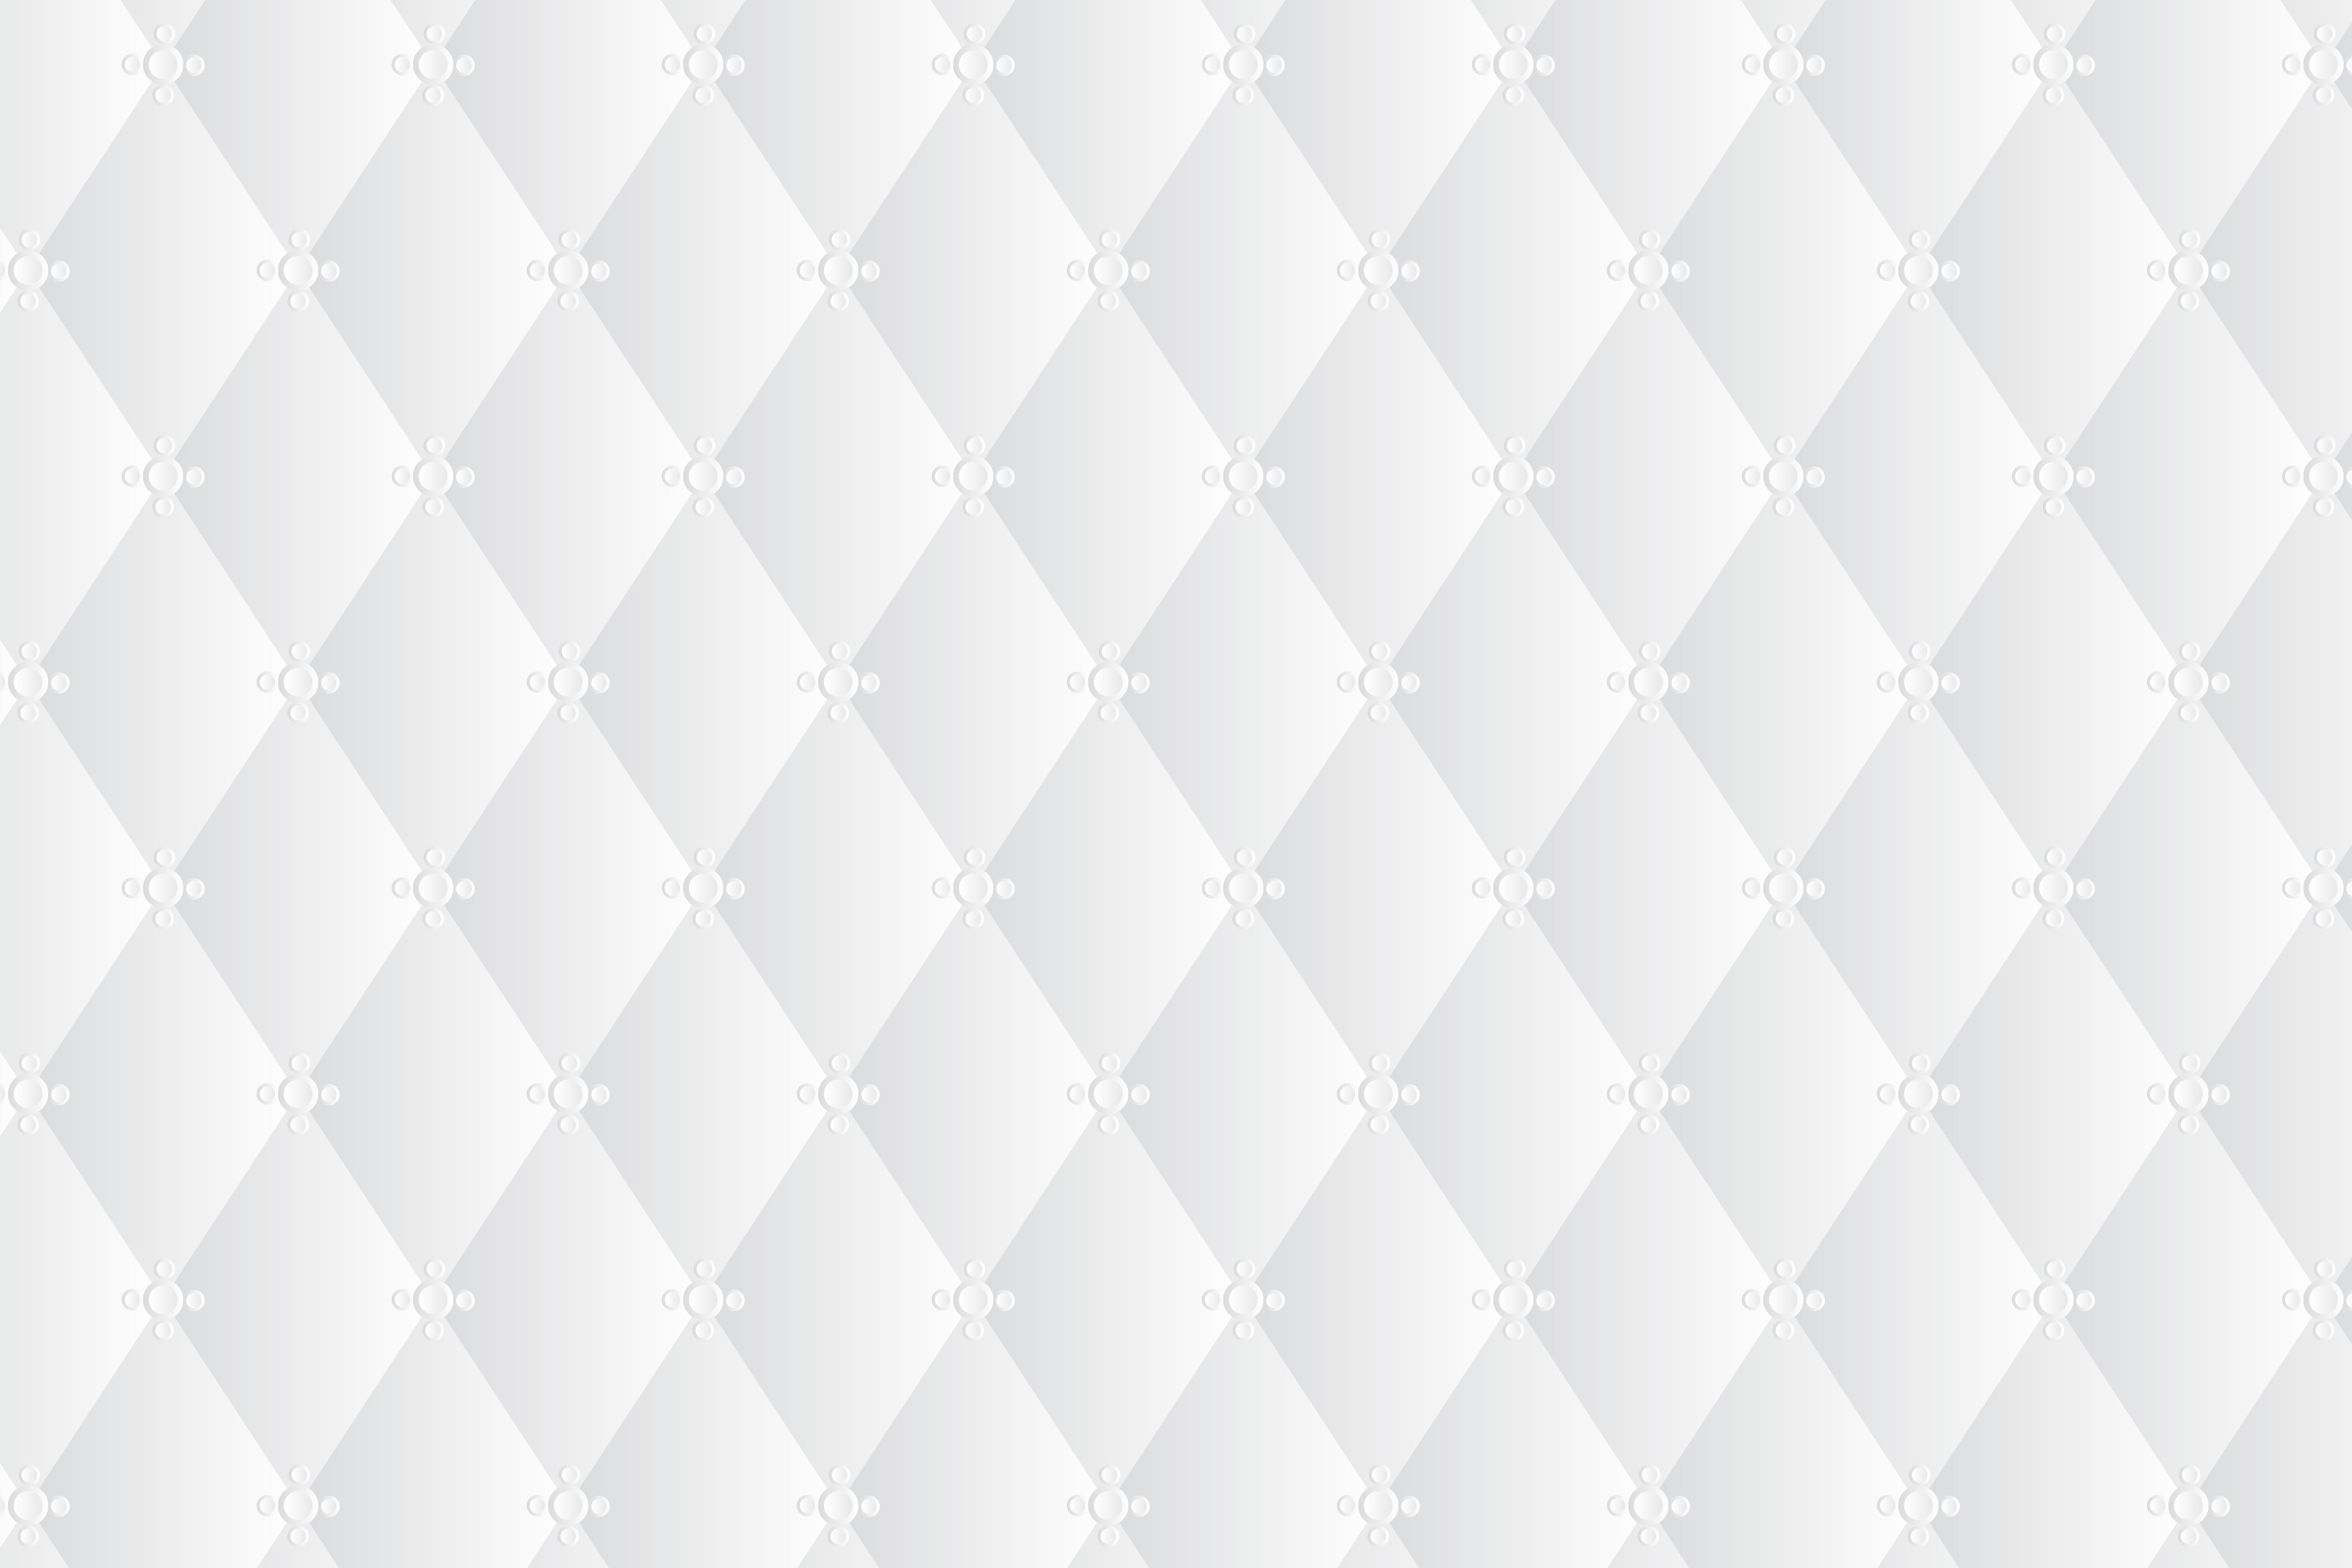 Chanel Quilted wallpaper by Iqrax  Download on ZEDGE  de88